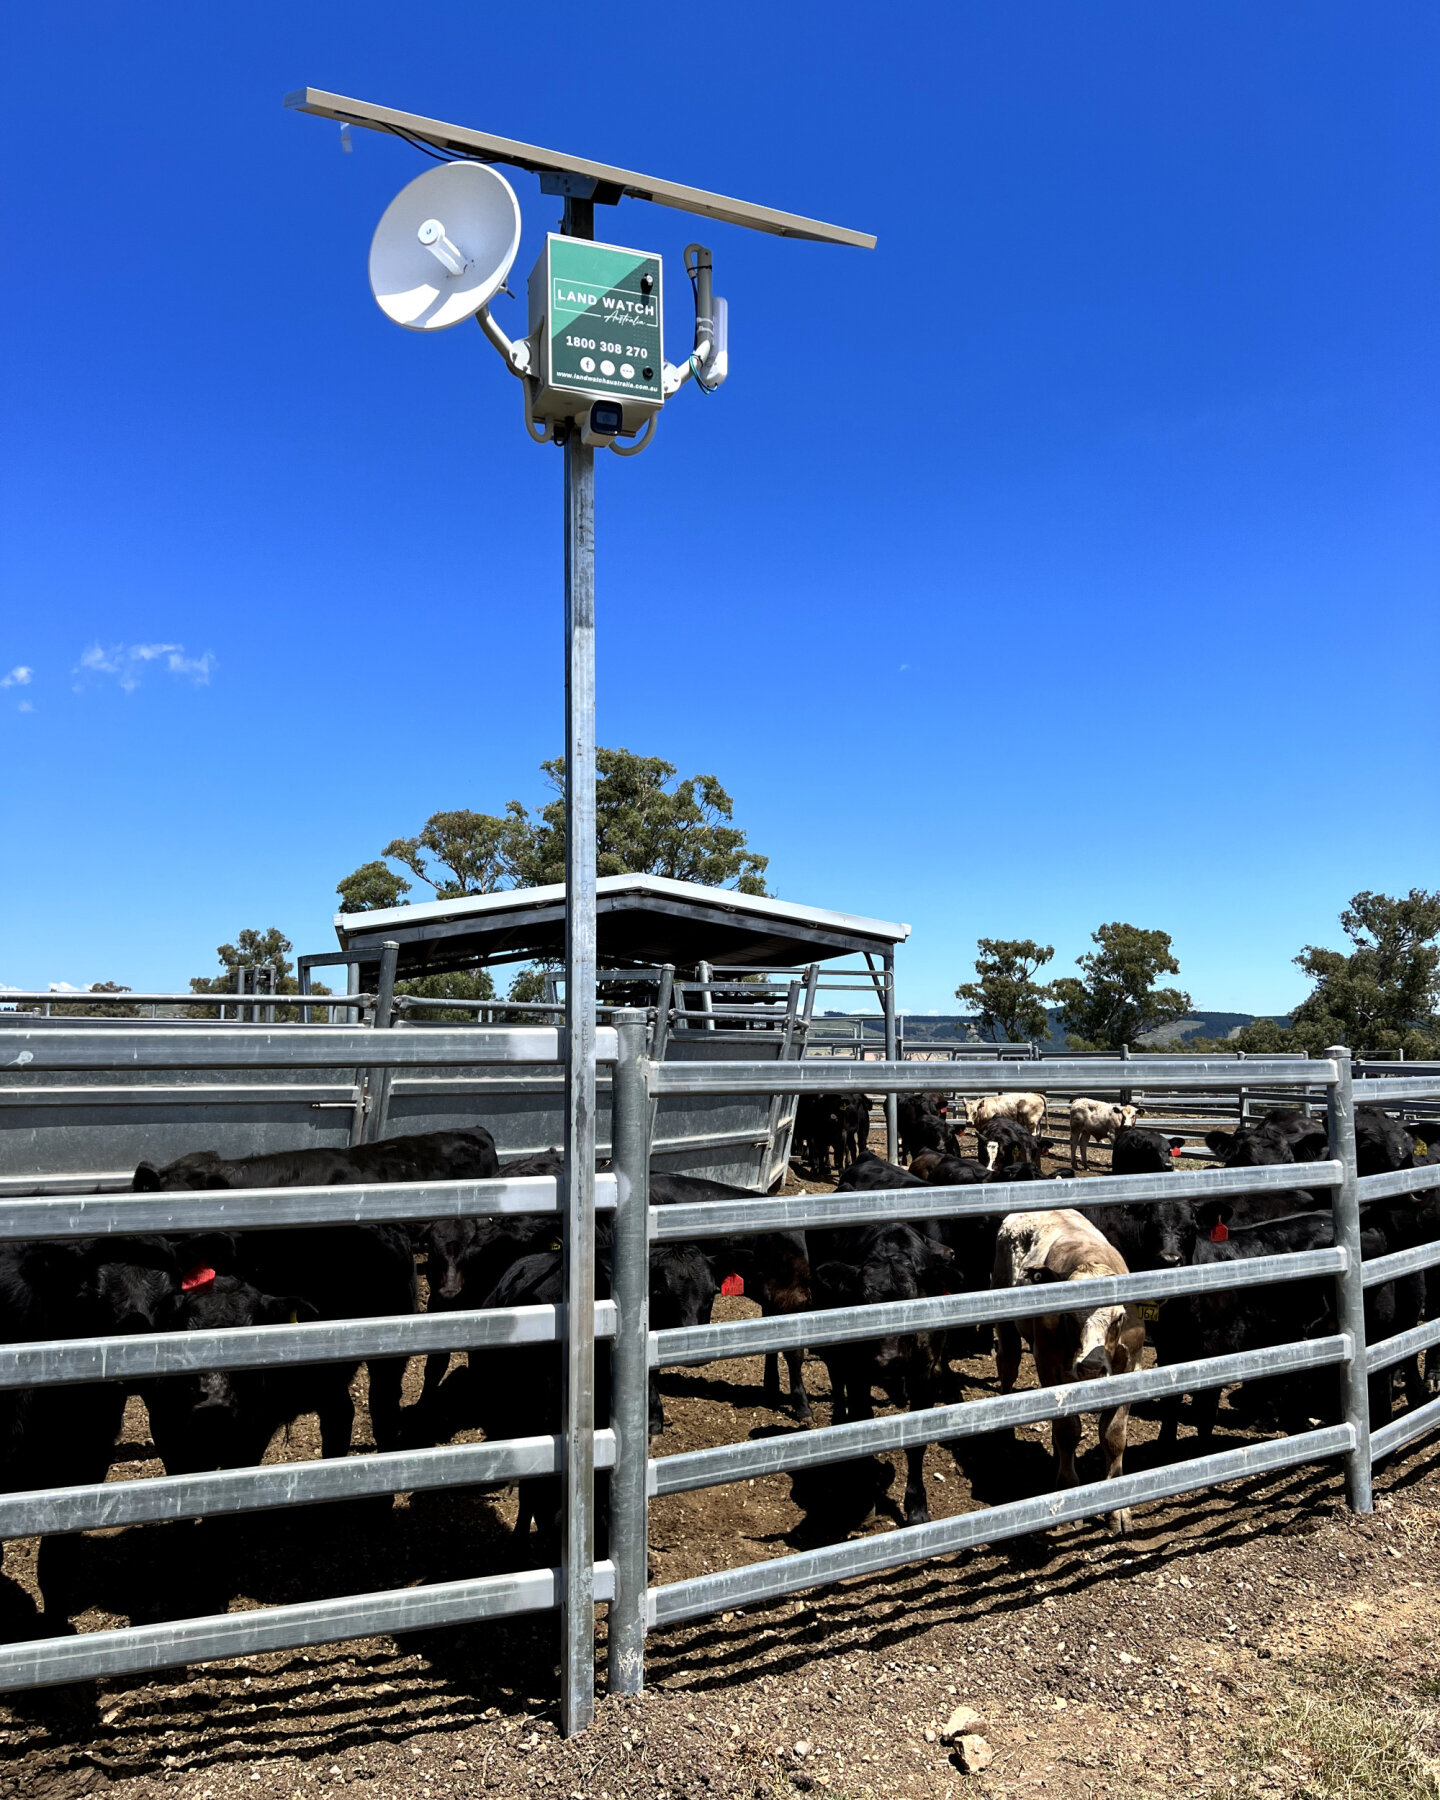 Cattle theft is a pandemic in the outback. We are helping to stamp out theft and rustling with camera systems installed on yards and ramps offering recorded footage, scheduled notifications for property owners alerting of vehicles and trucks stopping